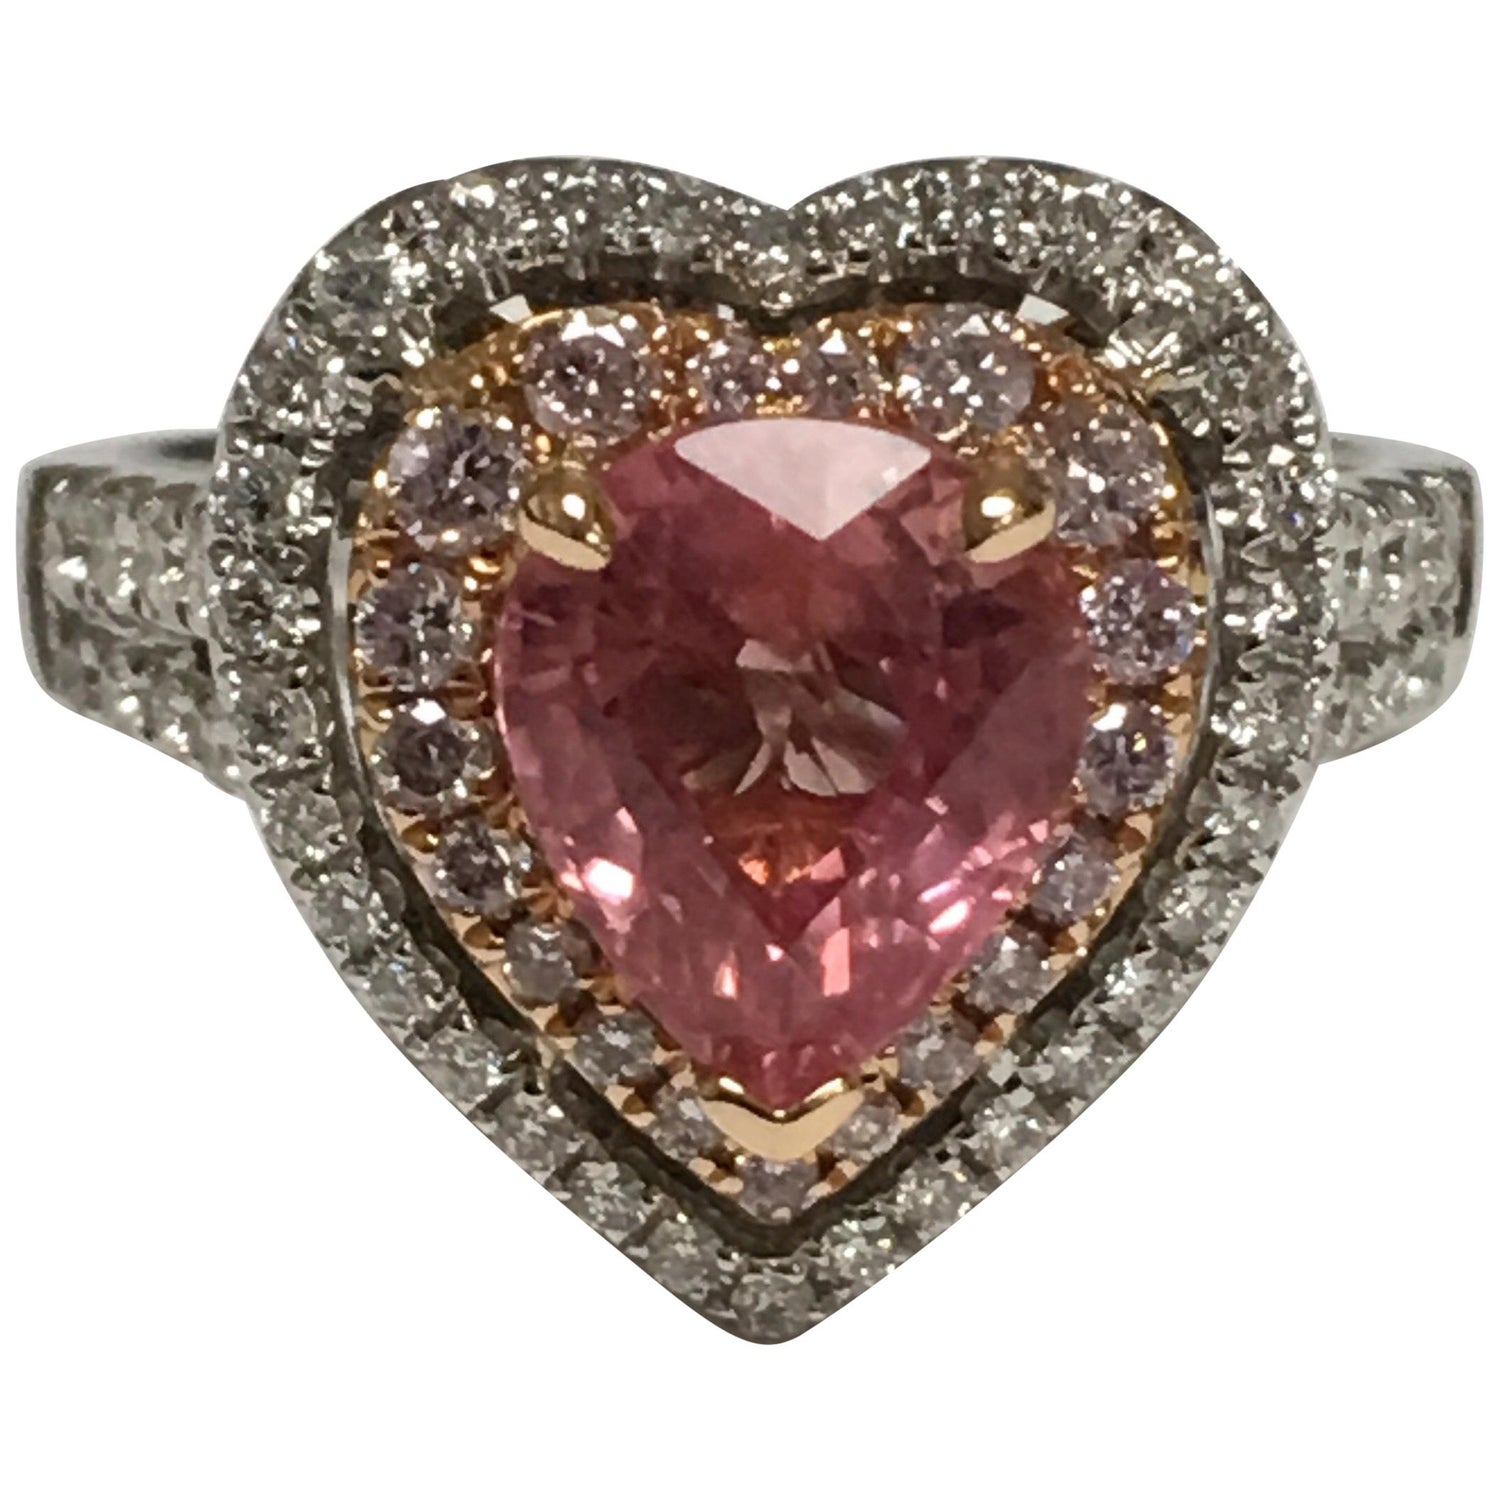 Gia Certified 2 39 Carat Padparadscha Sapphire Diamond Engagement Ring For Sale At 1stdibs,Patio Small Backyard Landscaping Ideas Do Myself